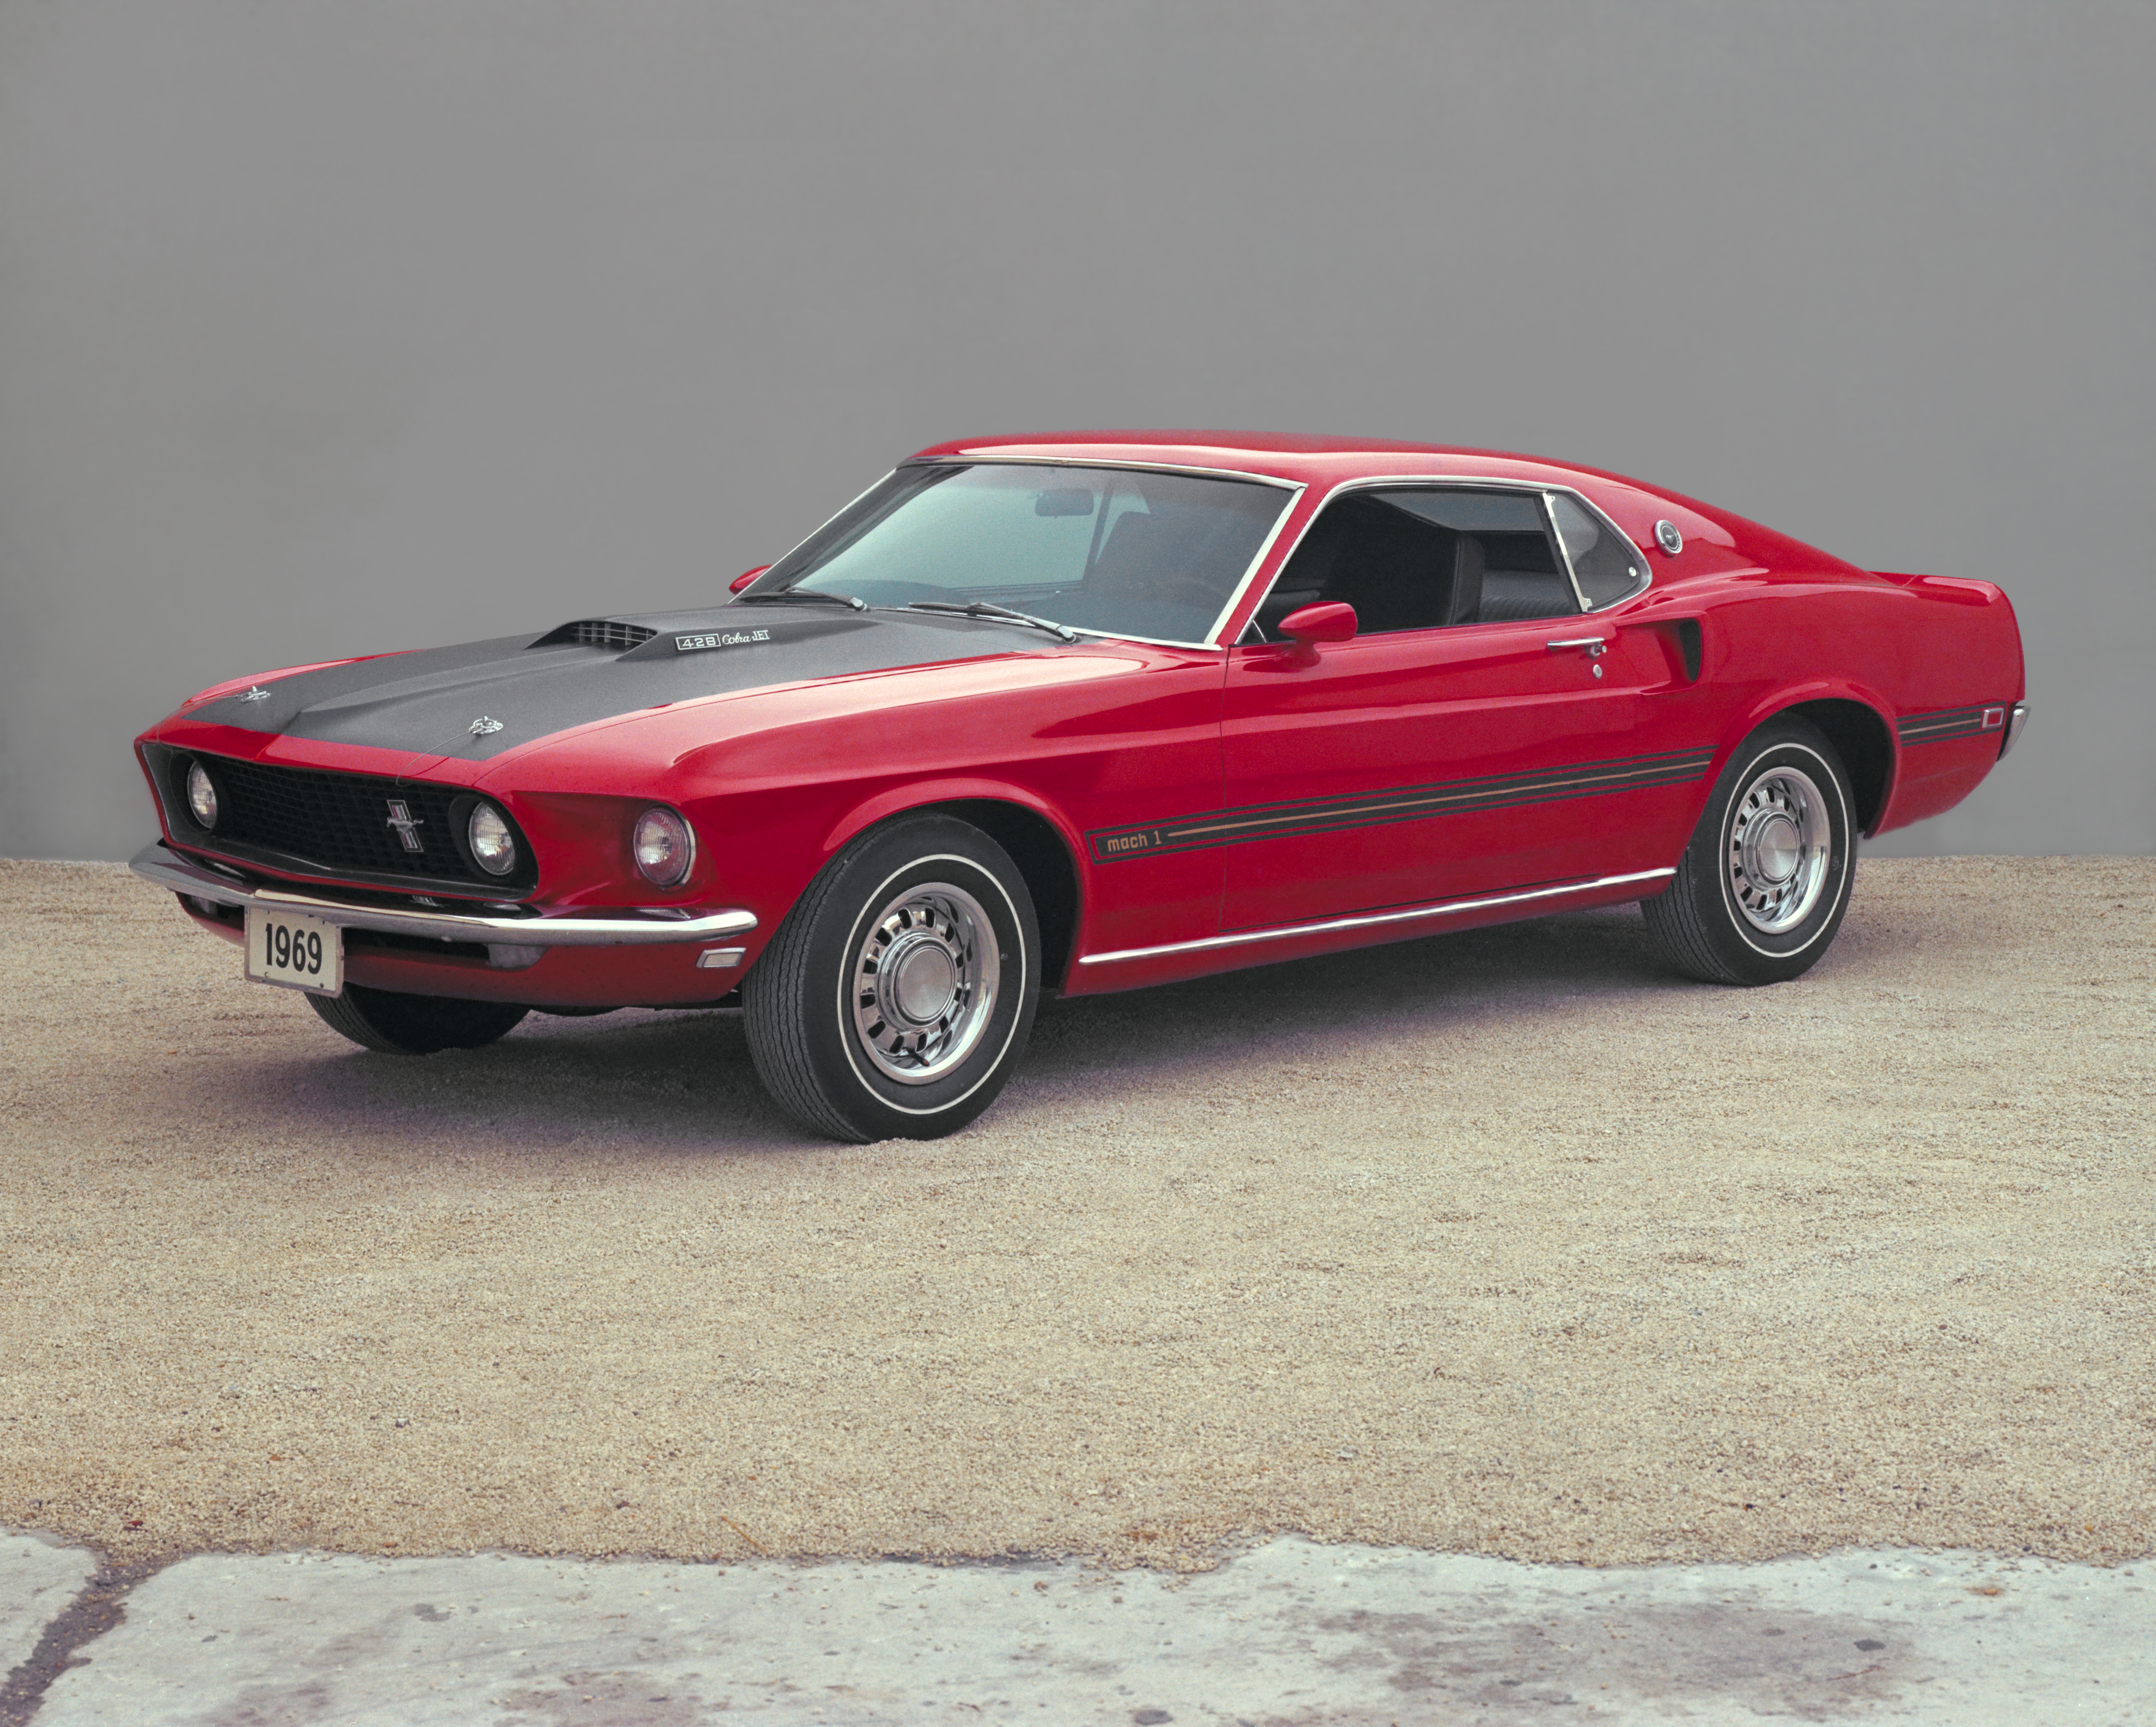 High Resolution Wallpaper | 1966 Ford Mustang Mach 1 4259x3412 px